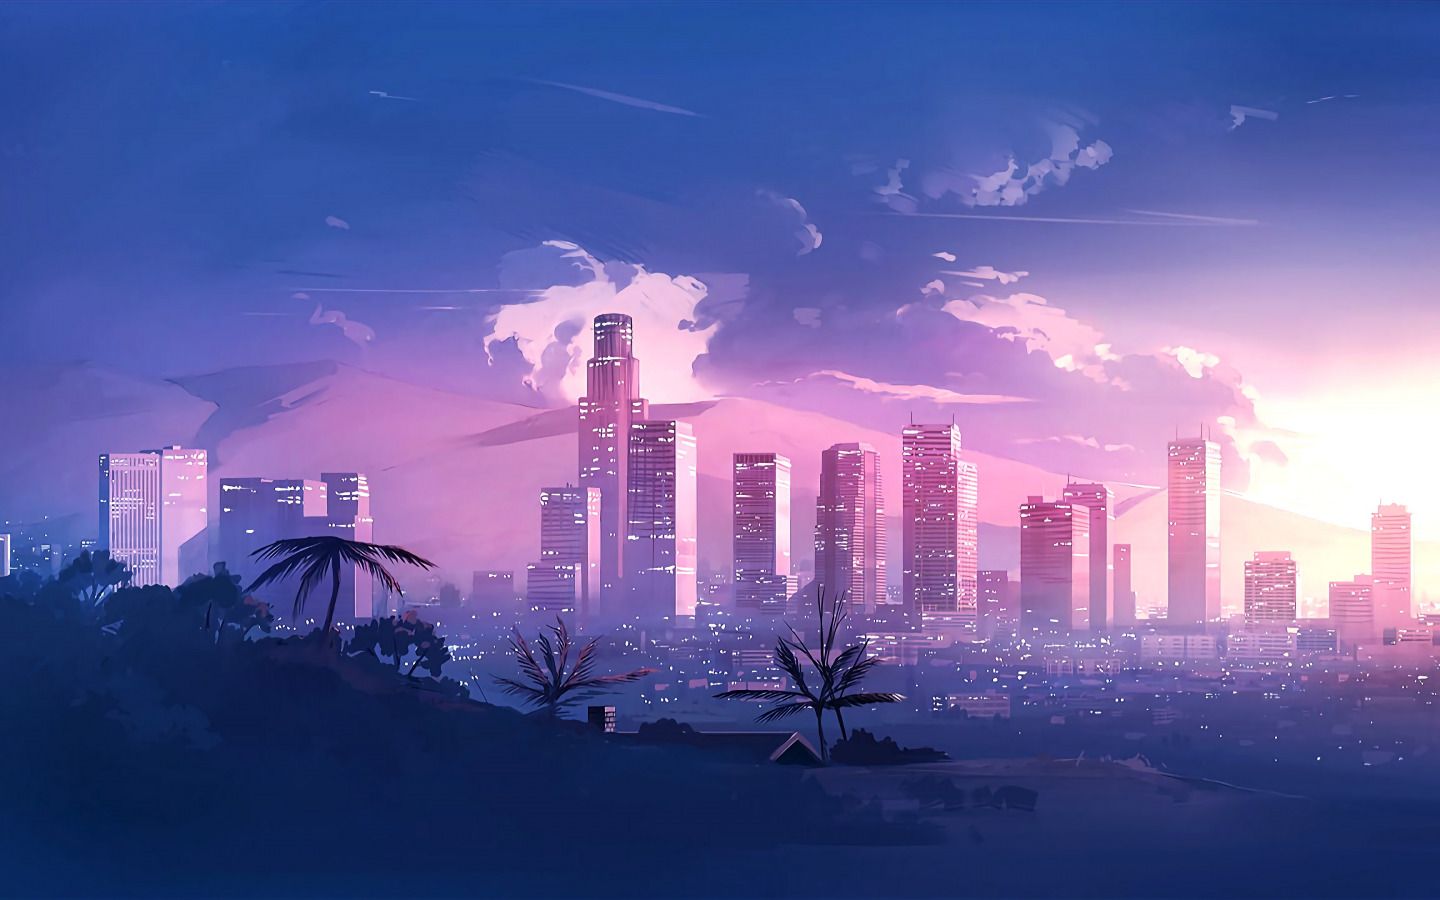 Download wallpaper Music, The city, Style, Landscape, 80s, Style, Neon, Illustration, 80's, Synth, Retrowave, Synthwave, New Retro Wave, section art in resolution 1440x900